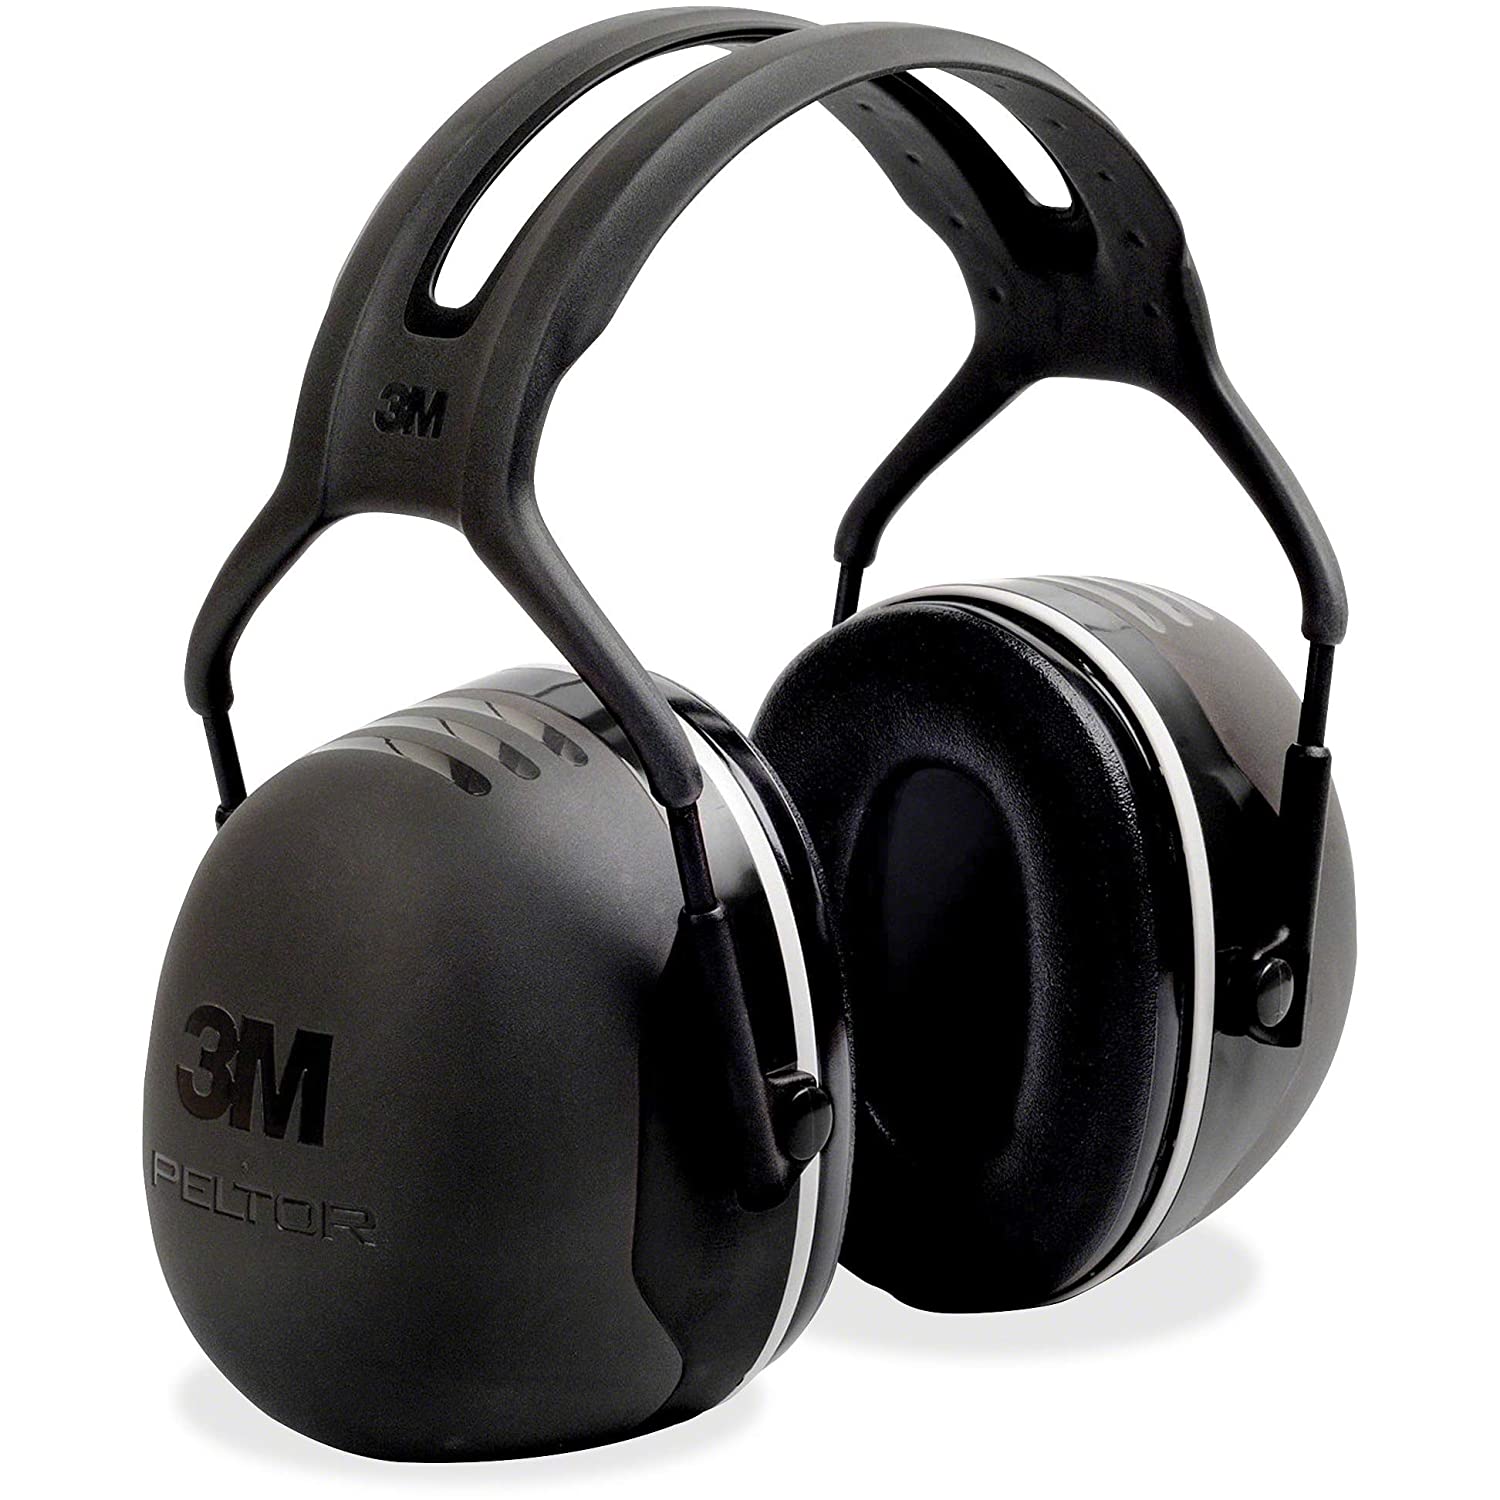 3M PELTOR X5A Over-the-Head Ear Muffs, Noise Protection